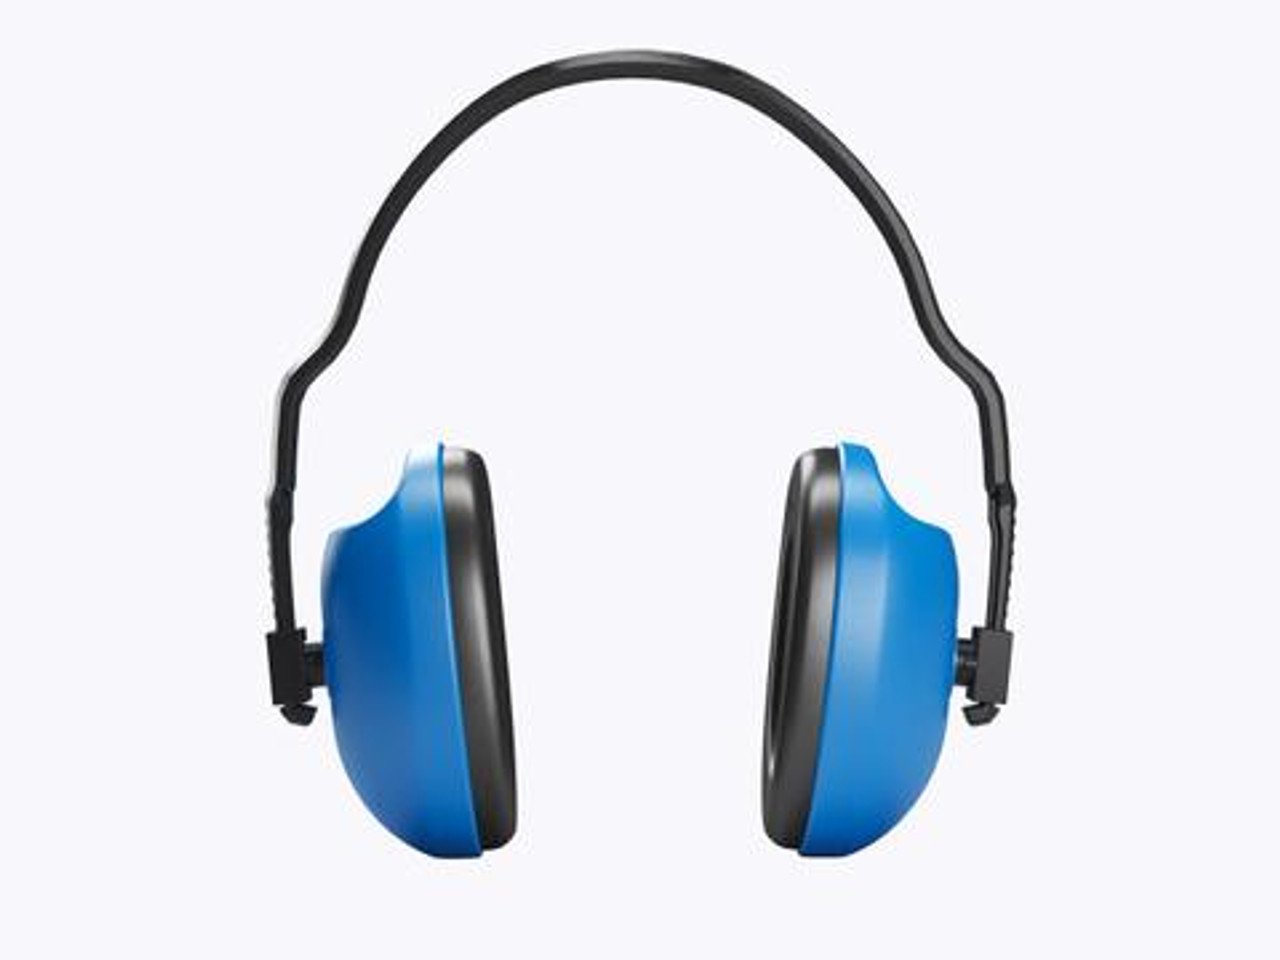 HELLBERG Ear Muffs | JUNIOR Blue Class 2 Earmuffs  with Headband for Young Children, Formula 1 and V8 Supercars in Melbourne, Sydney and Brisbane.